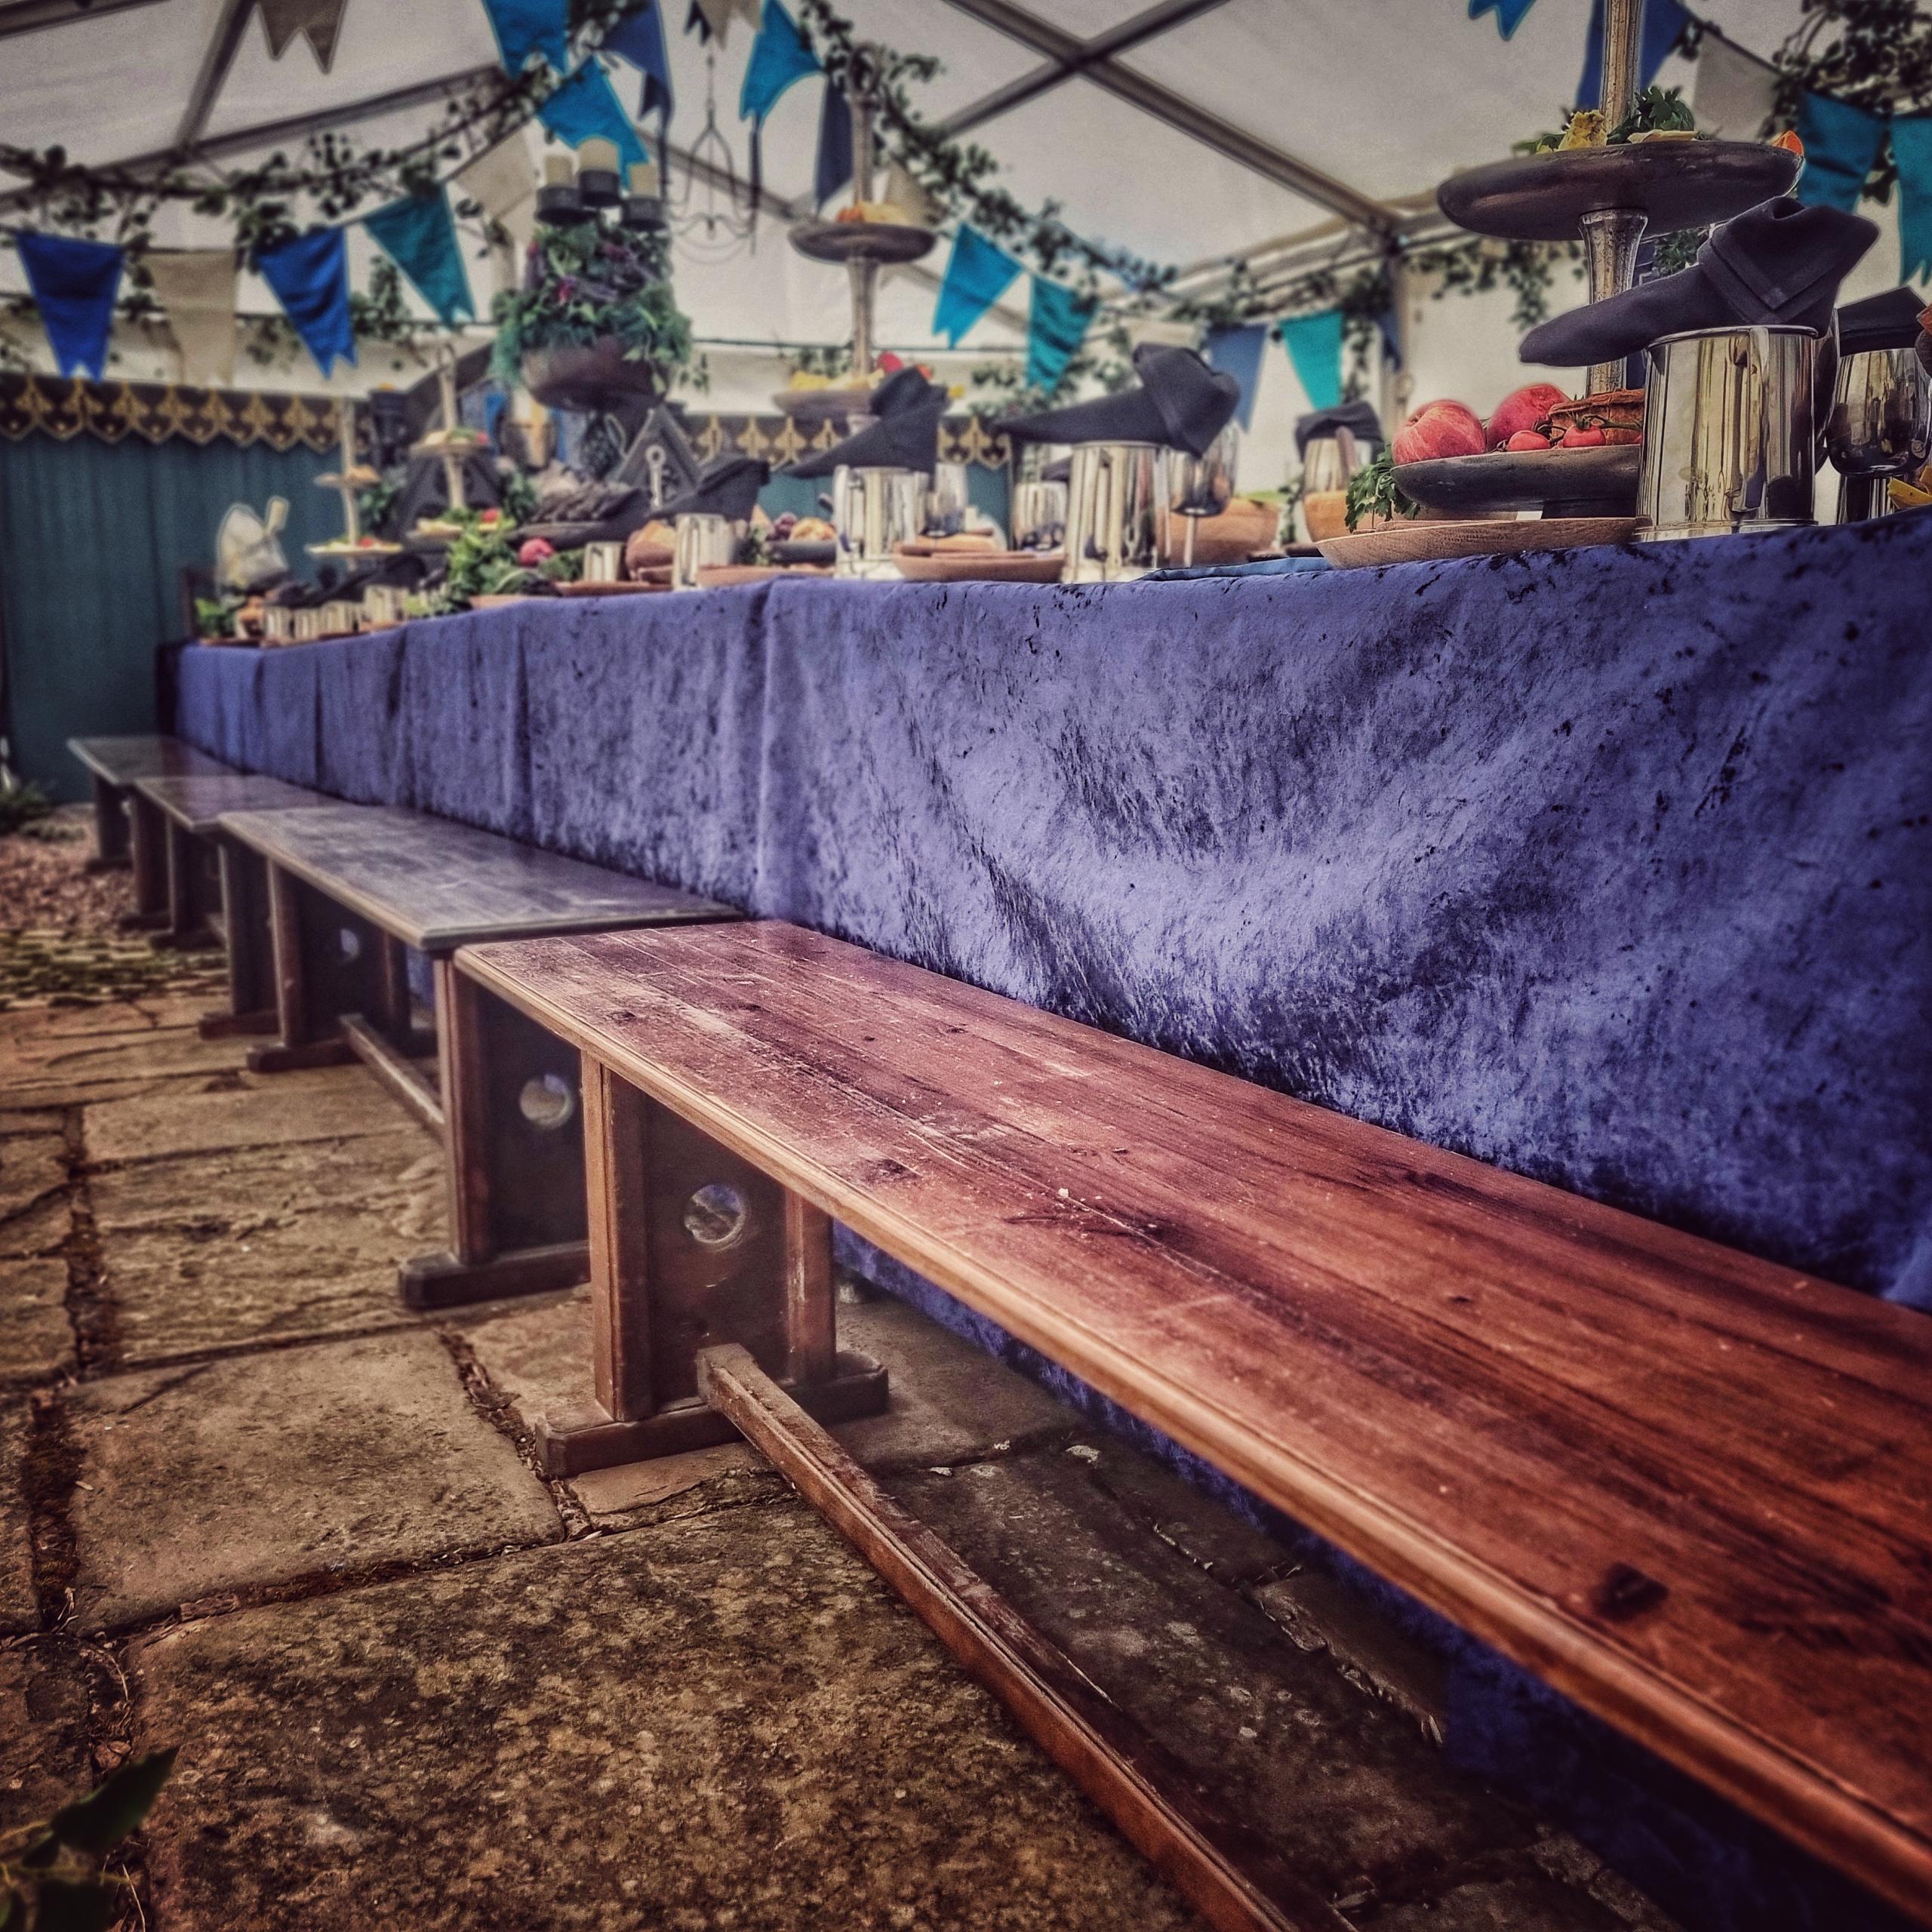 Wooden benches and blue velvet cloths